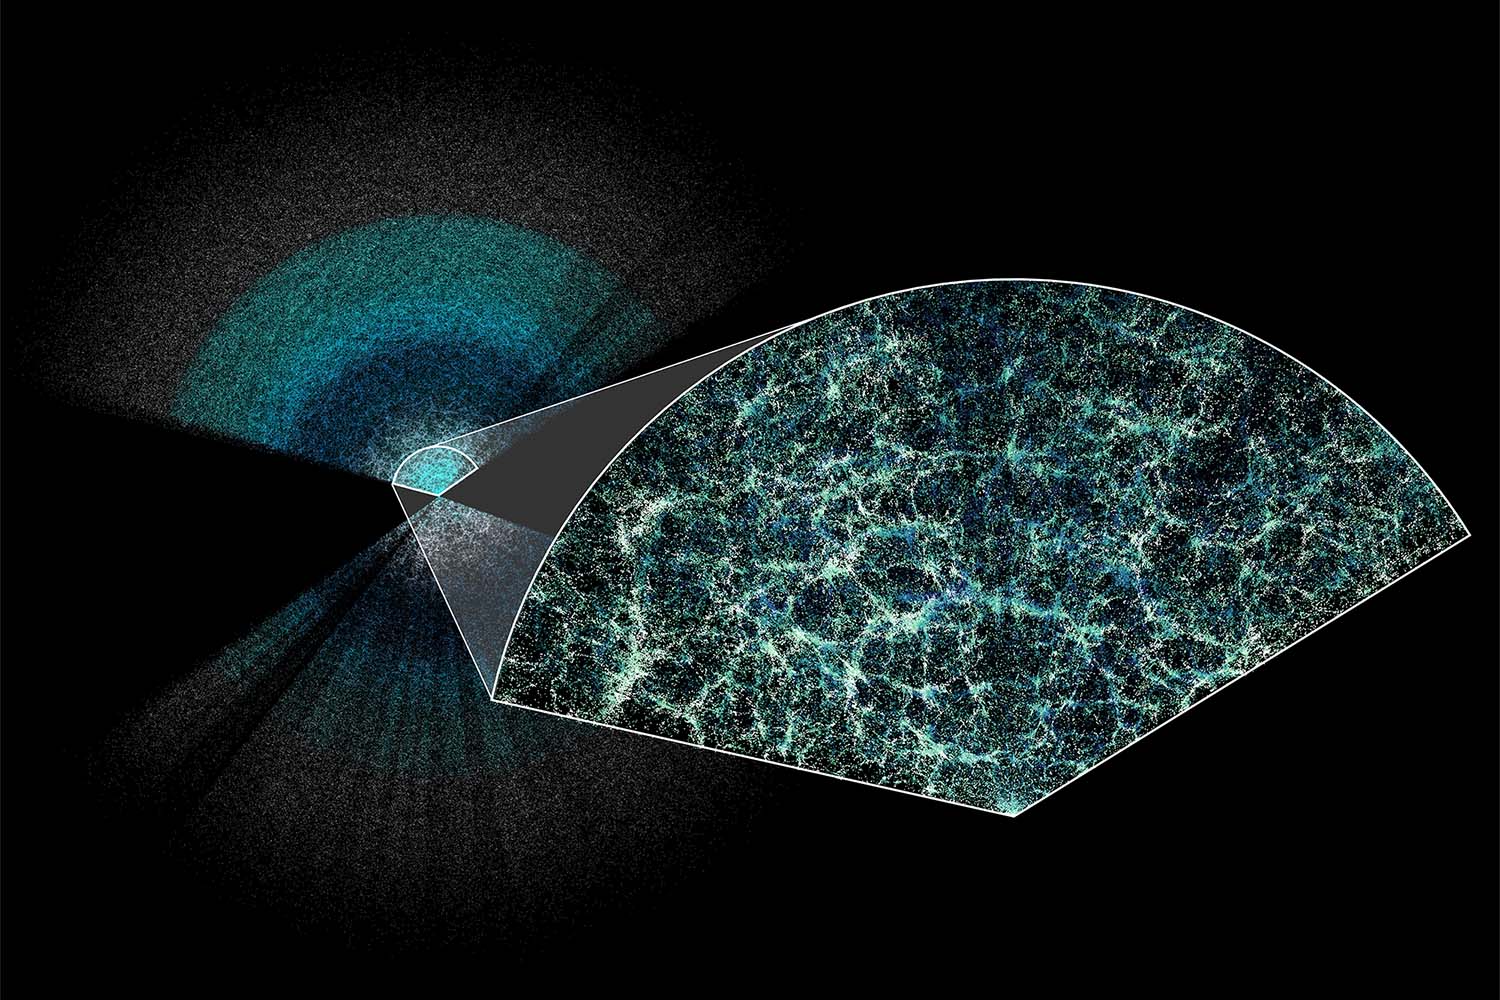 New Findings Reveal Clearer Picture of Expanding Universe